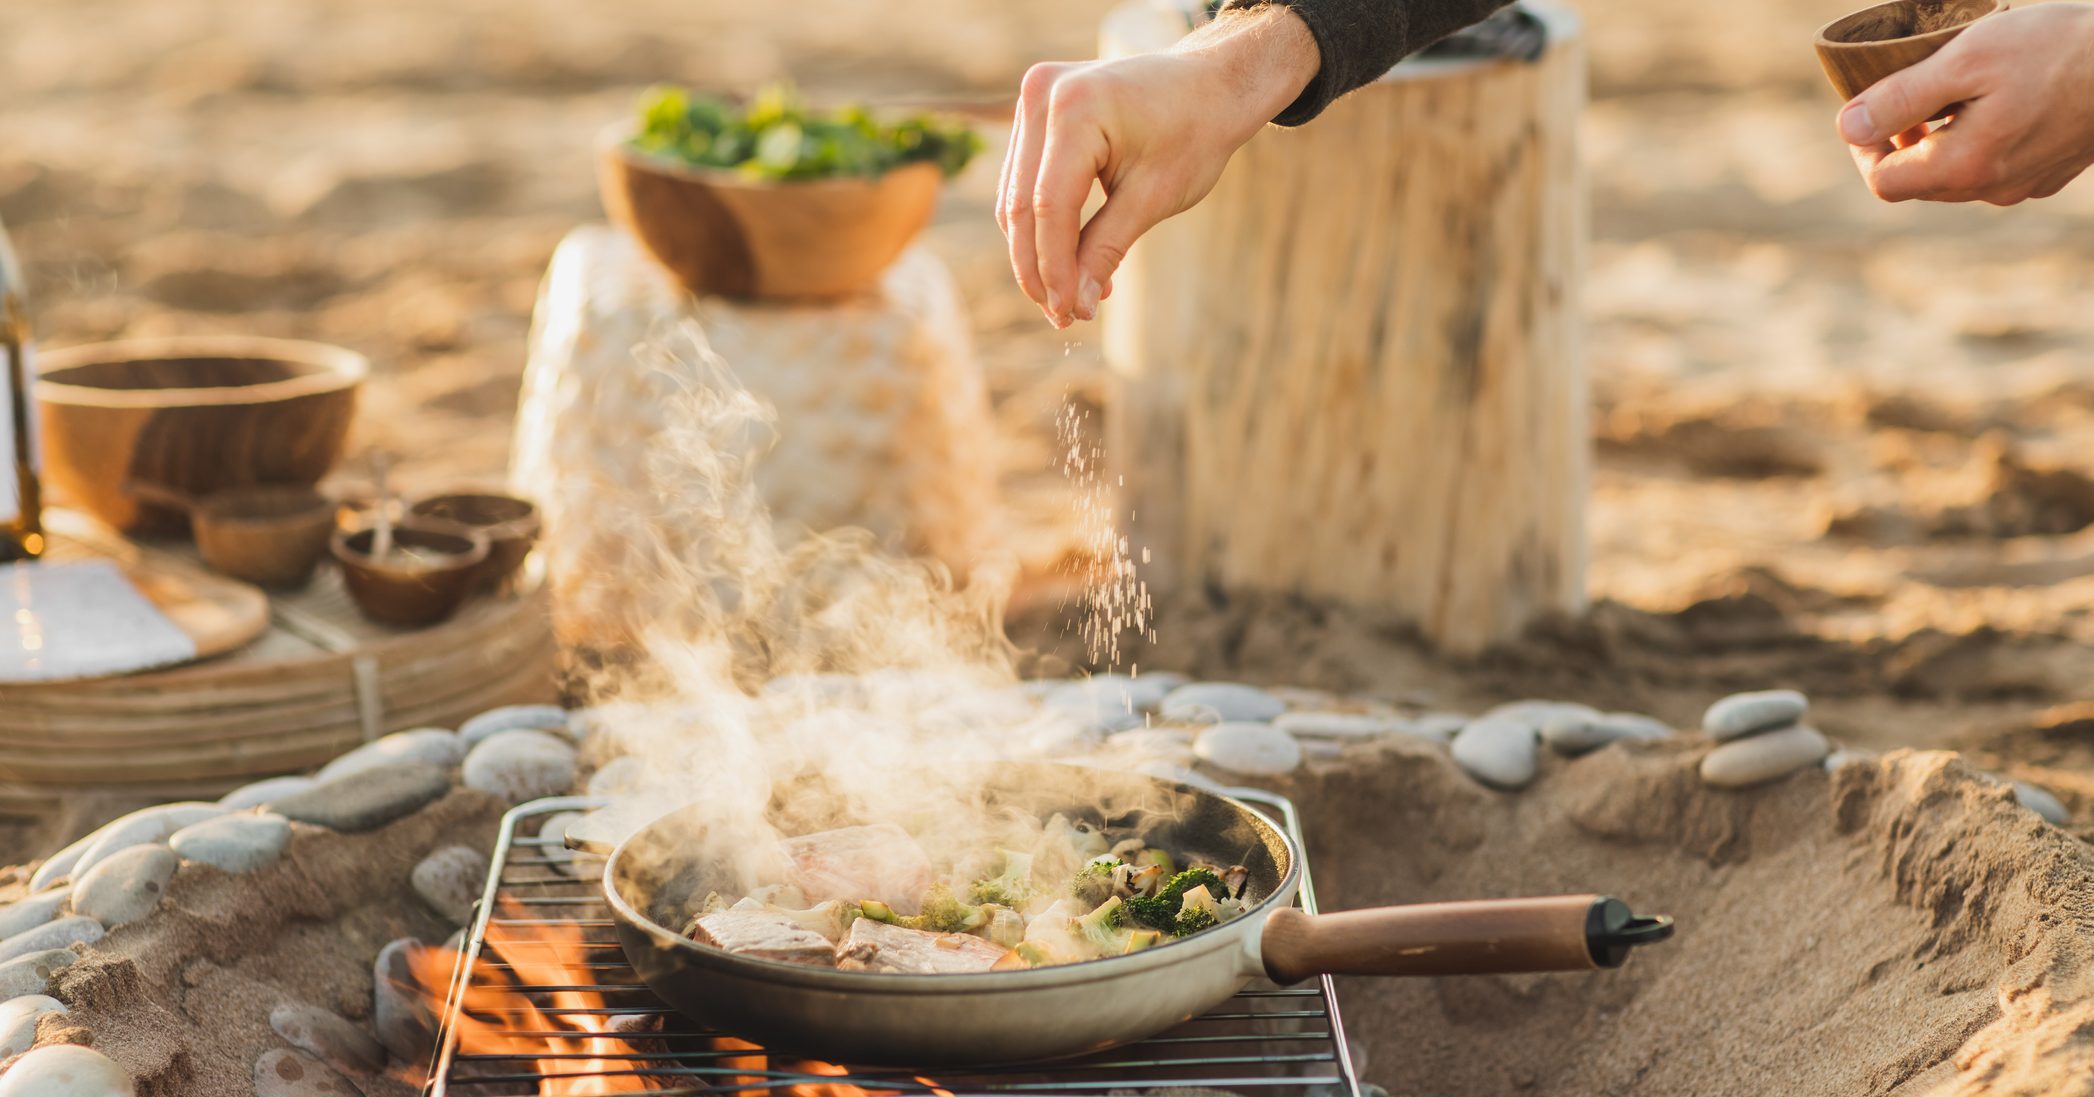 Camp Cooking: 21 Ways to Make a Meal of It - Cool of the Wild